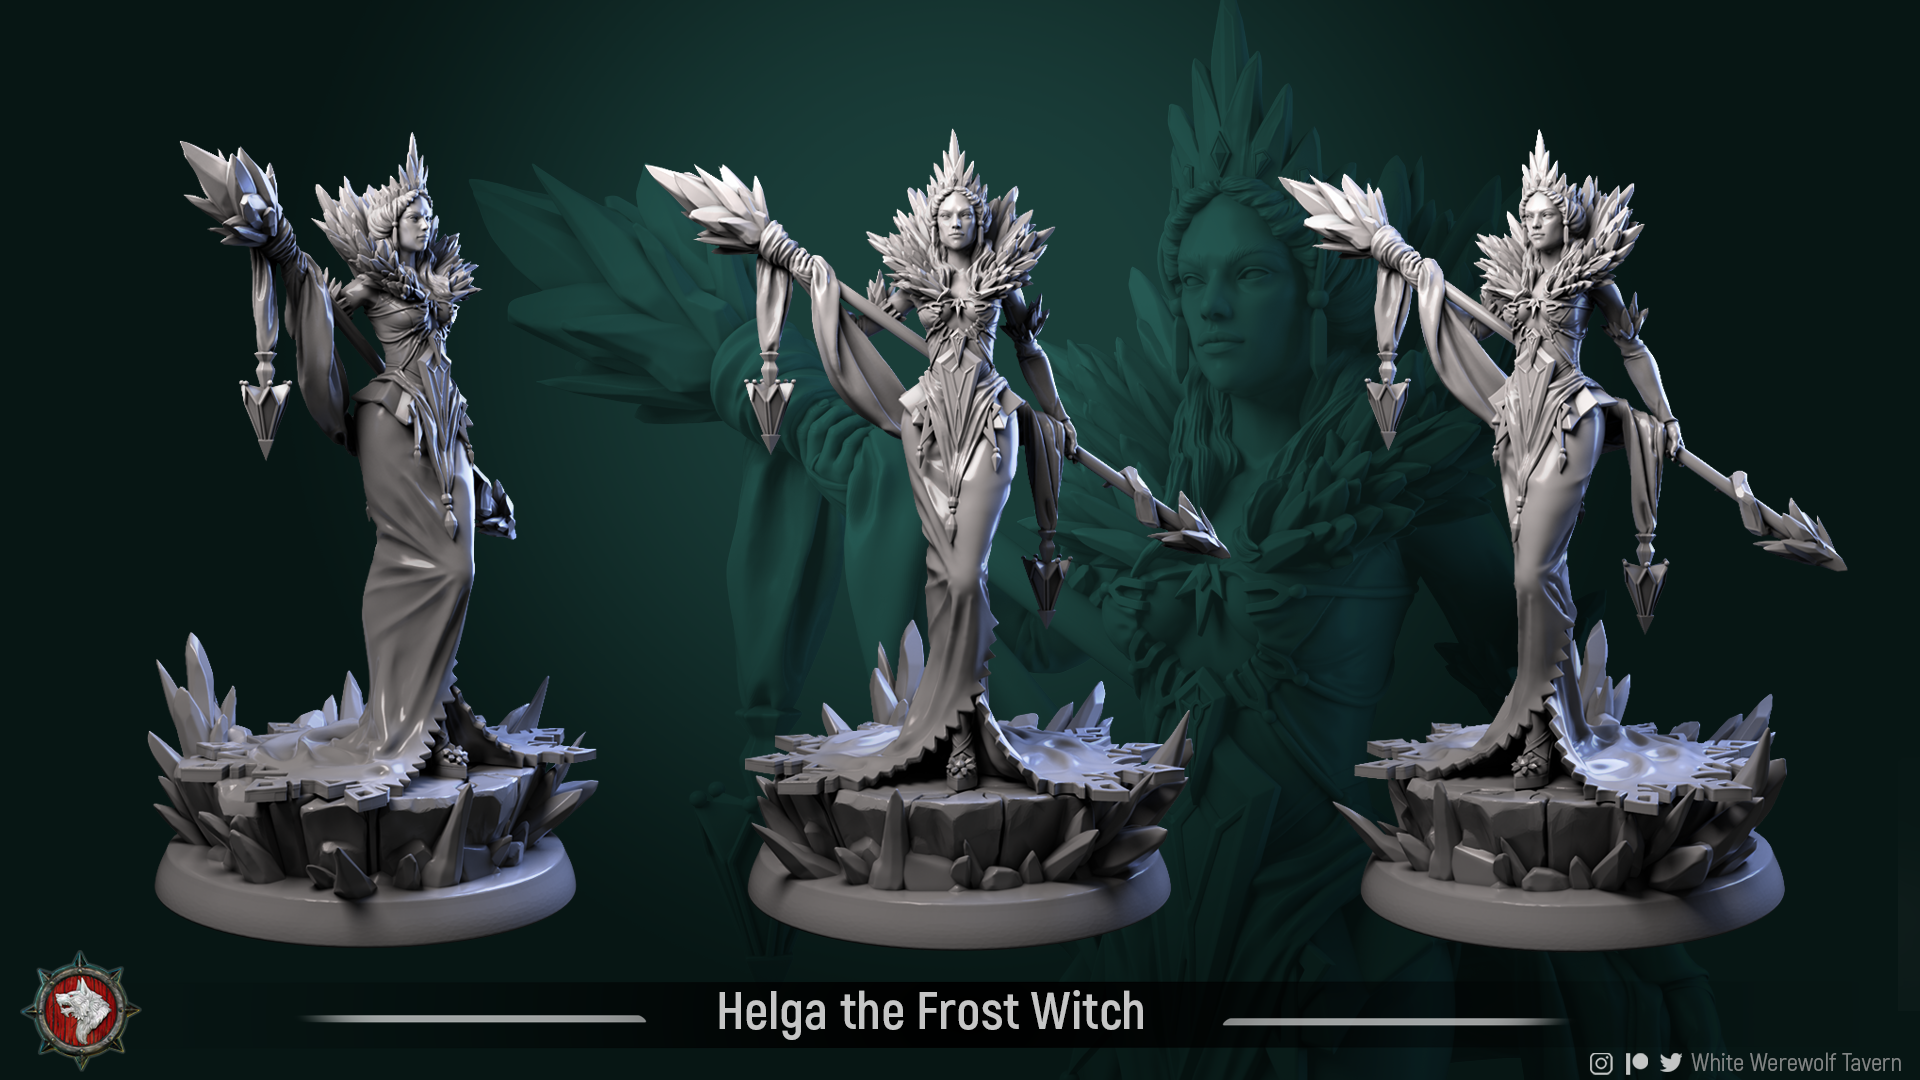 Helga the Frost Witch